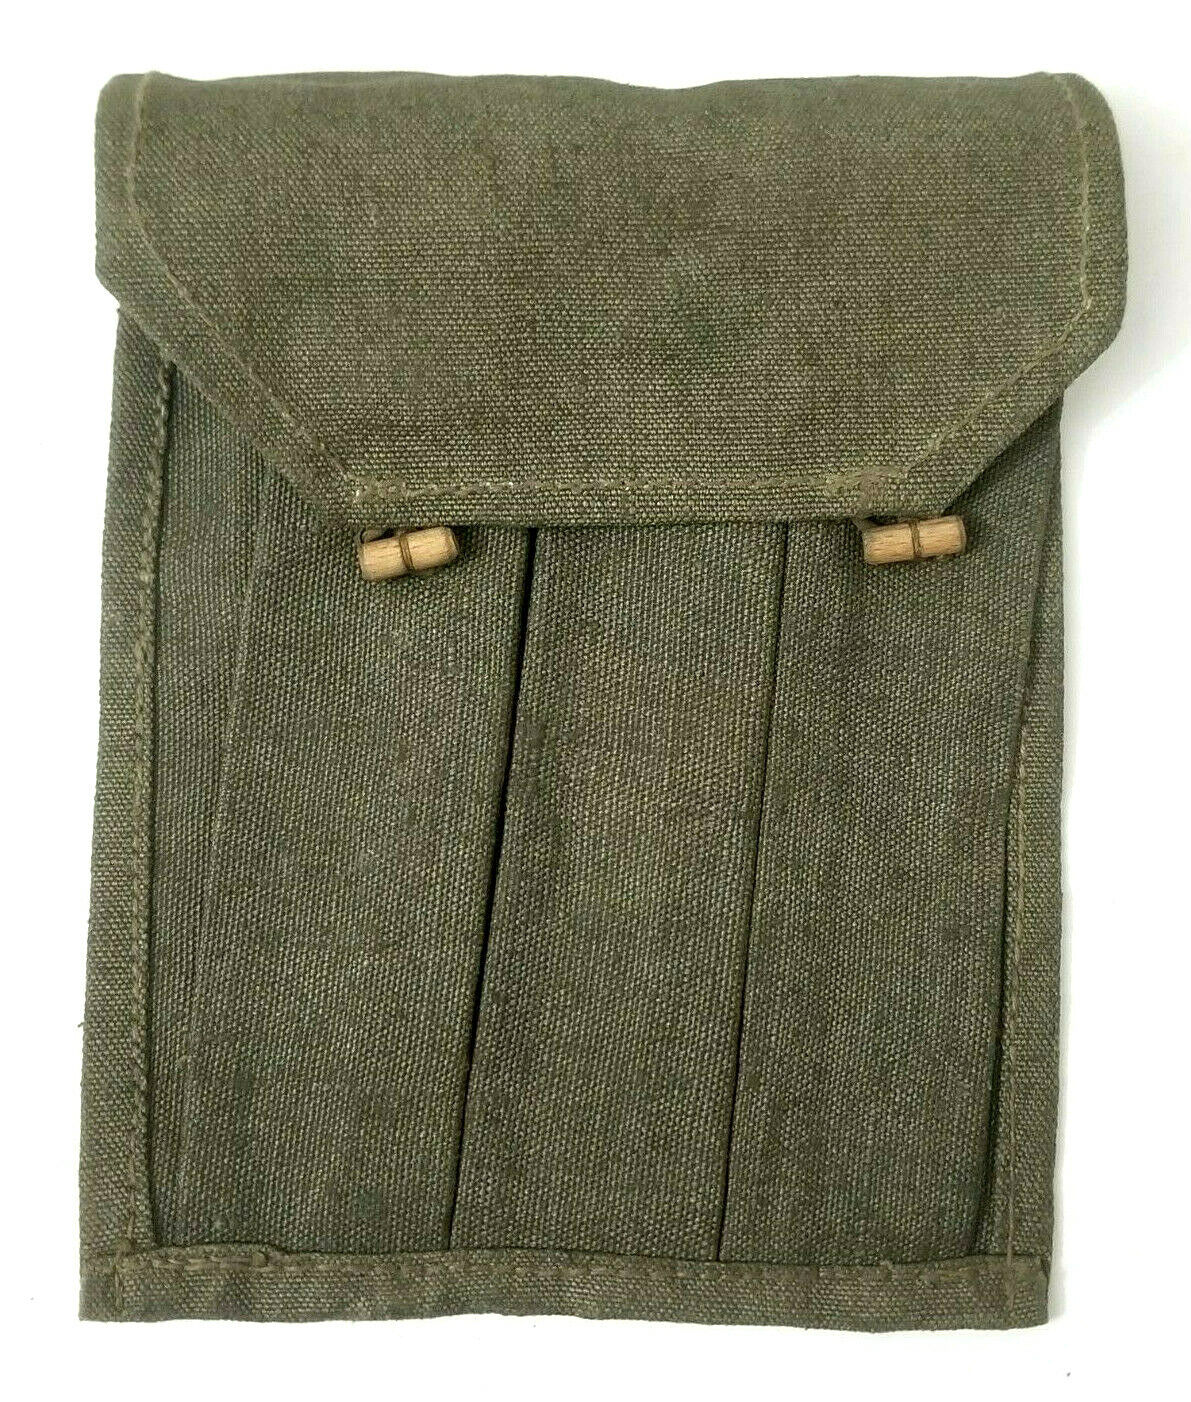 Vintage Polish Military PPS-43 Canvas Magazine Pouch With Wooden Toggle Closures